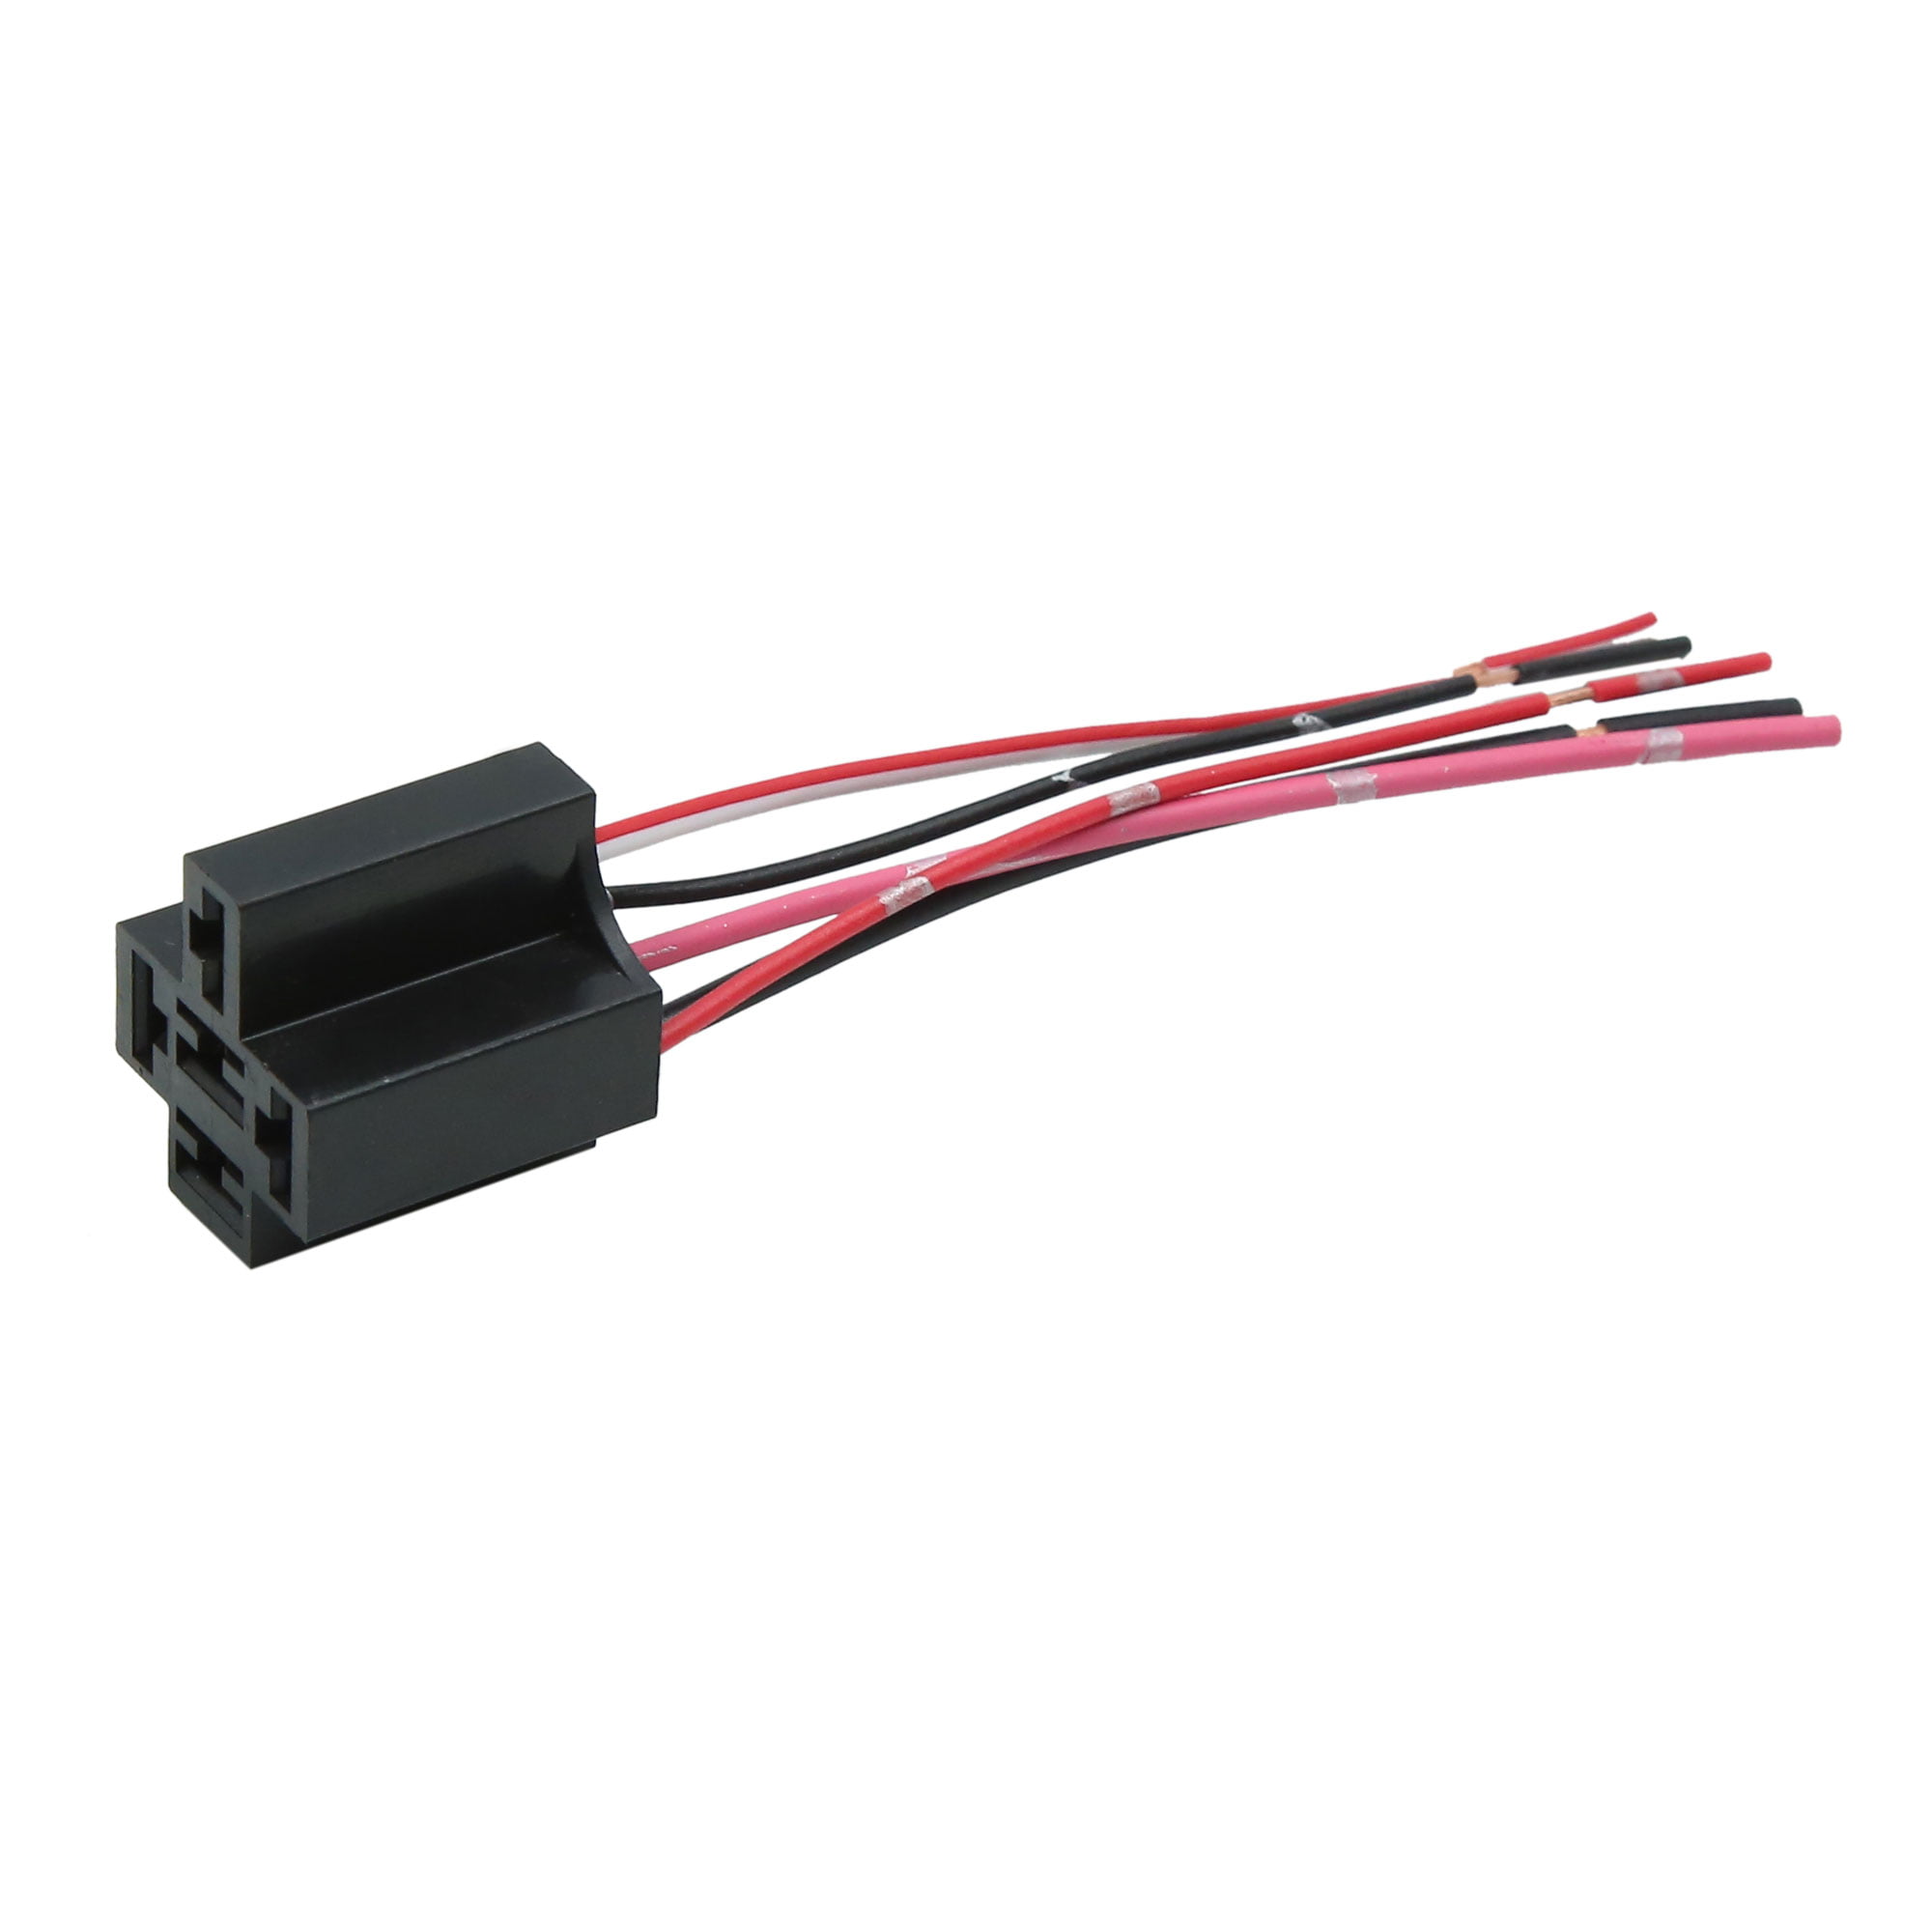 5 Pin Connector harness Plug For Relays And Many Other Uses 12v/24v TOP Quality